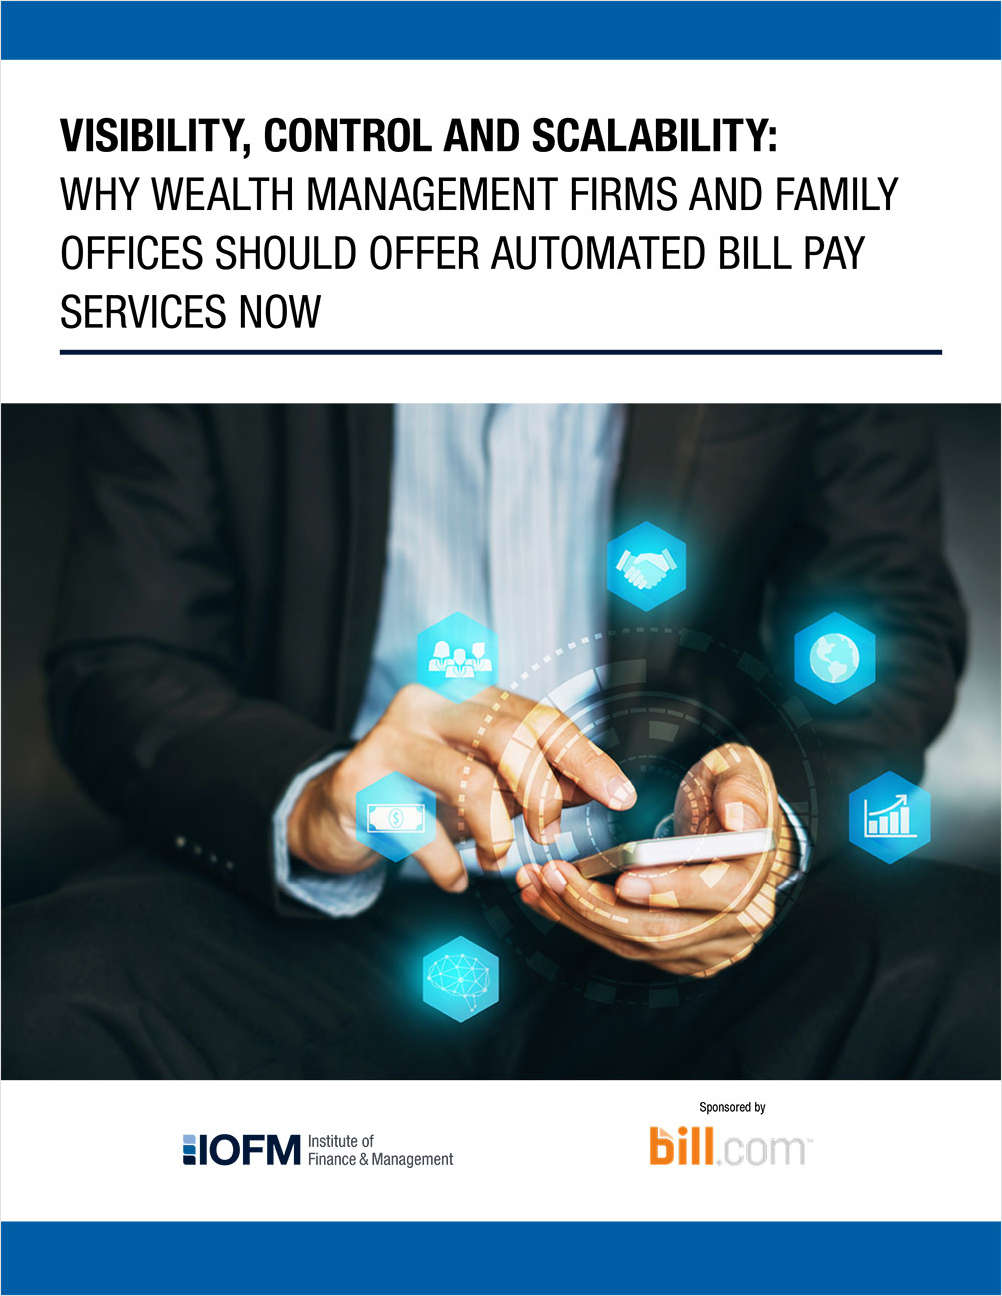 Visibility, Control & Scalability: Why Wealth Management Firms & Family Offices Should Offer Automated Bill Pay Services Now